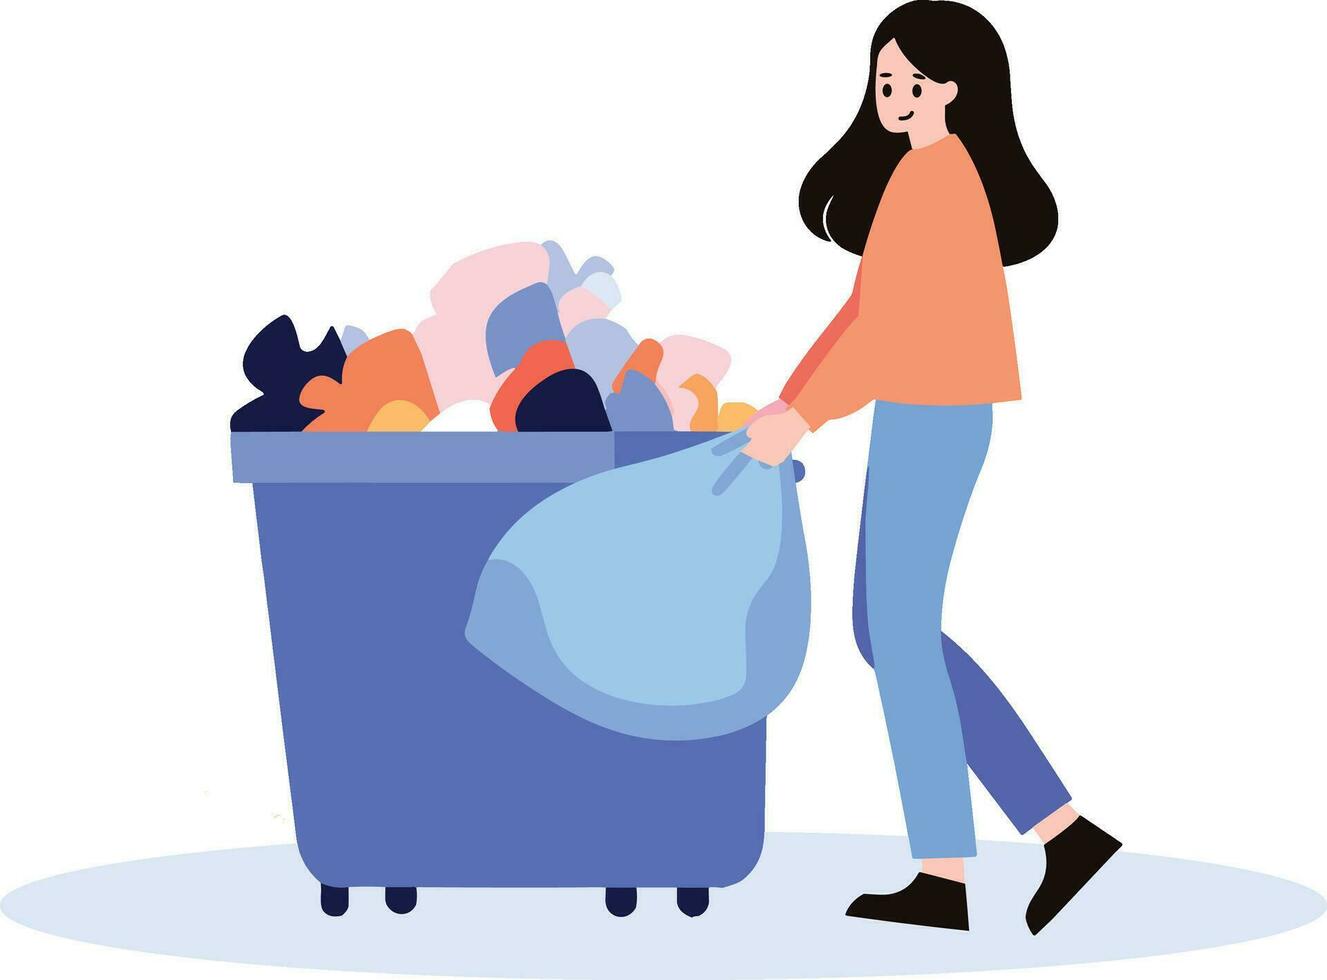 woman taking out trash in flat style isolated on background vector